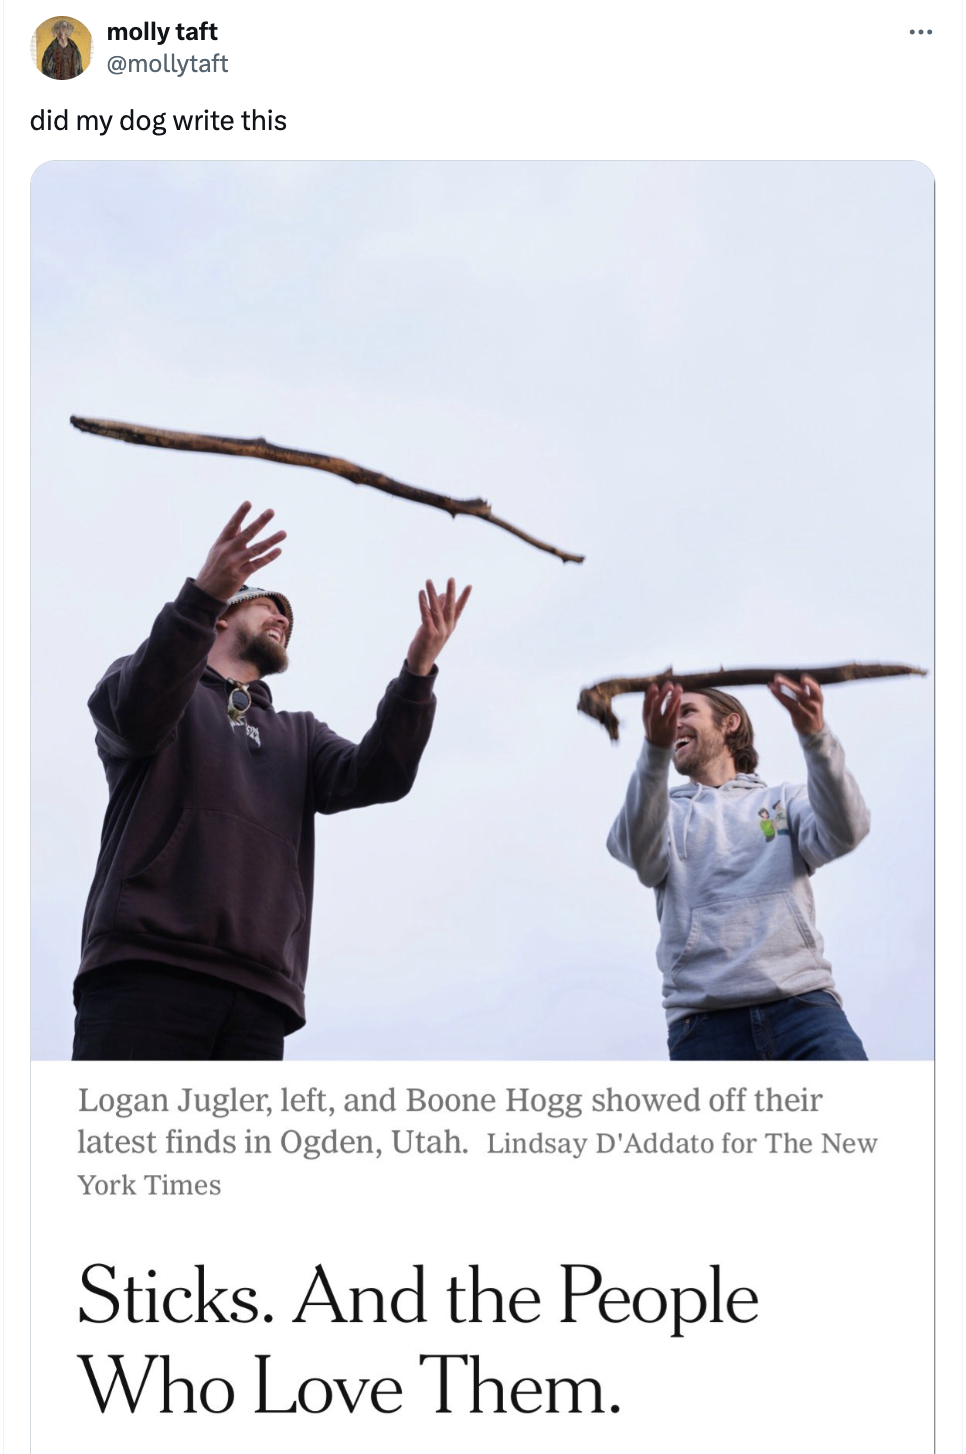 cast a fishing line - molly taft did my dog write this Logan Jugler, left, and Boone Hogg showed off their latest finds in Ogden, Utah. Lindsay D'Addato for The New York Times Sticks. And the People Who Love Them.